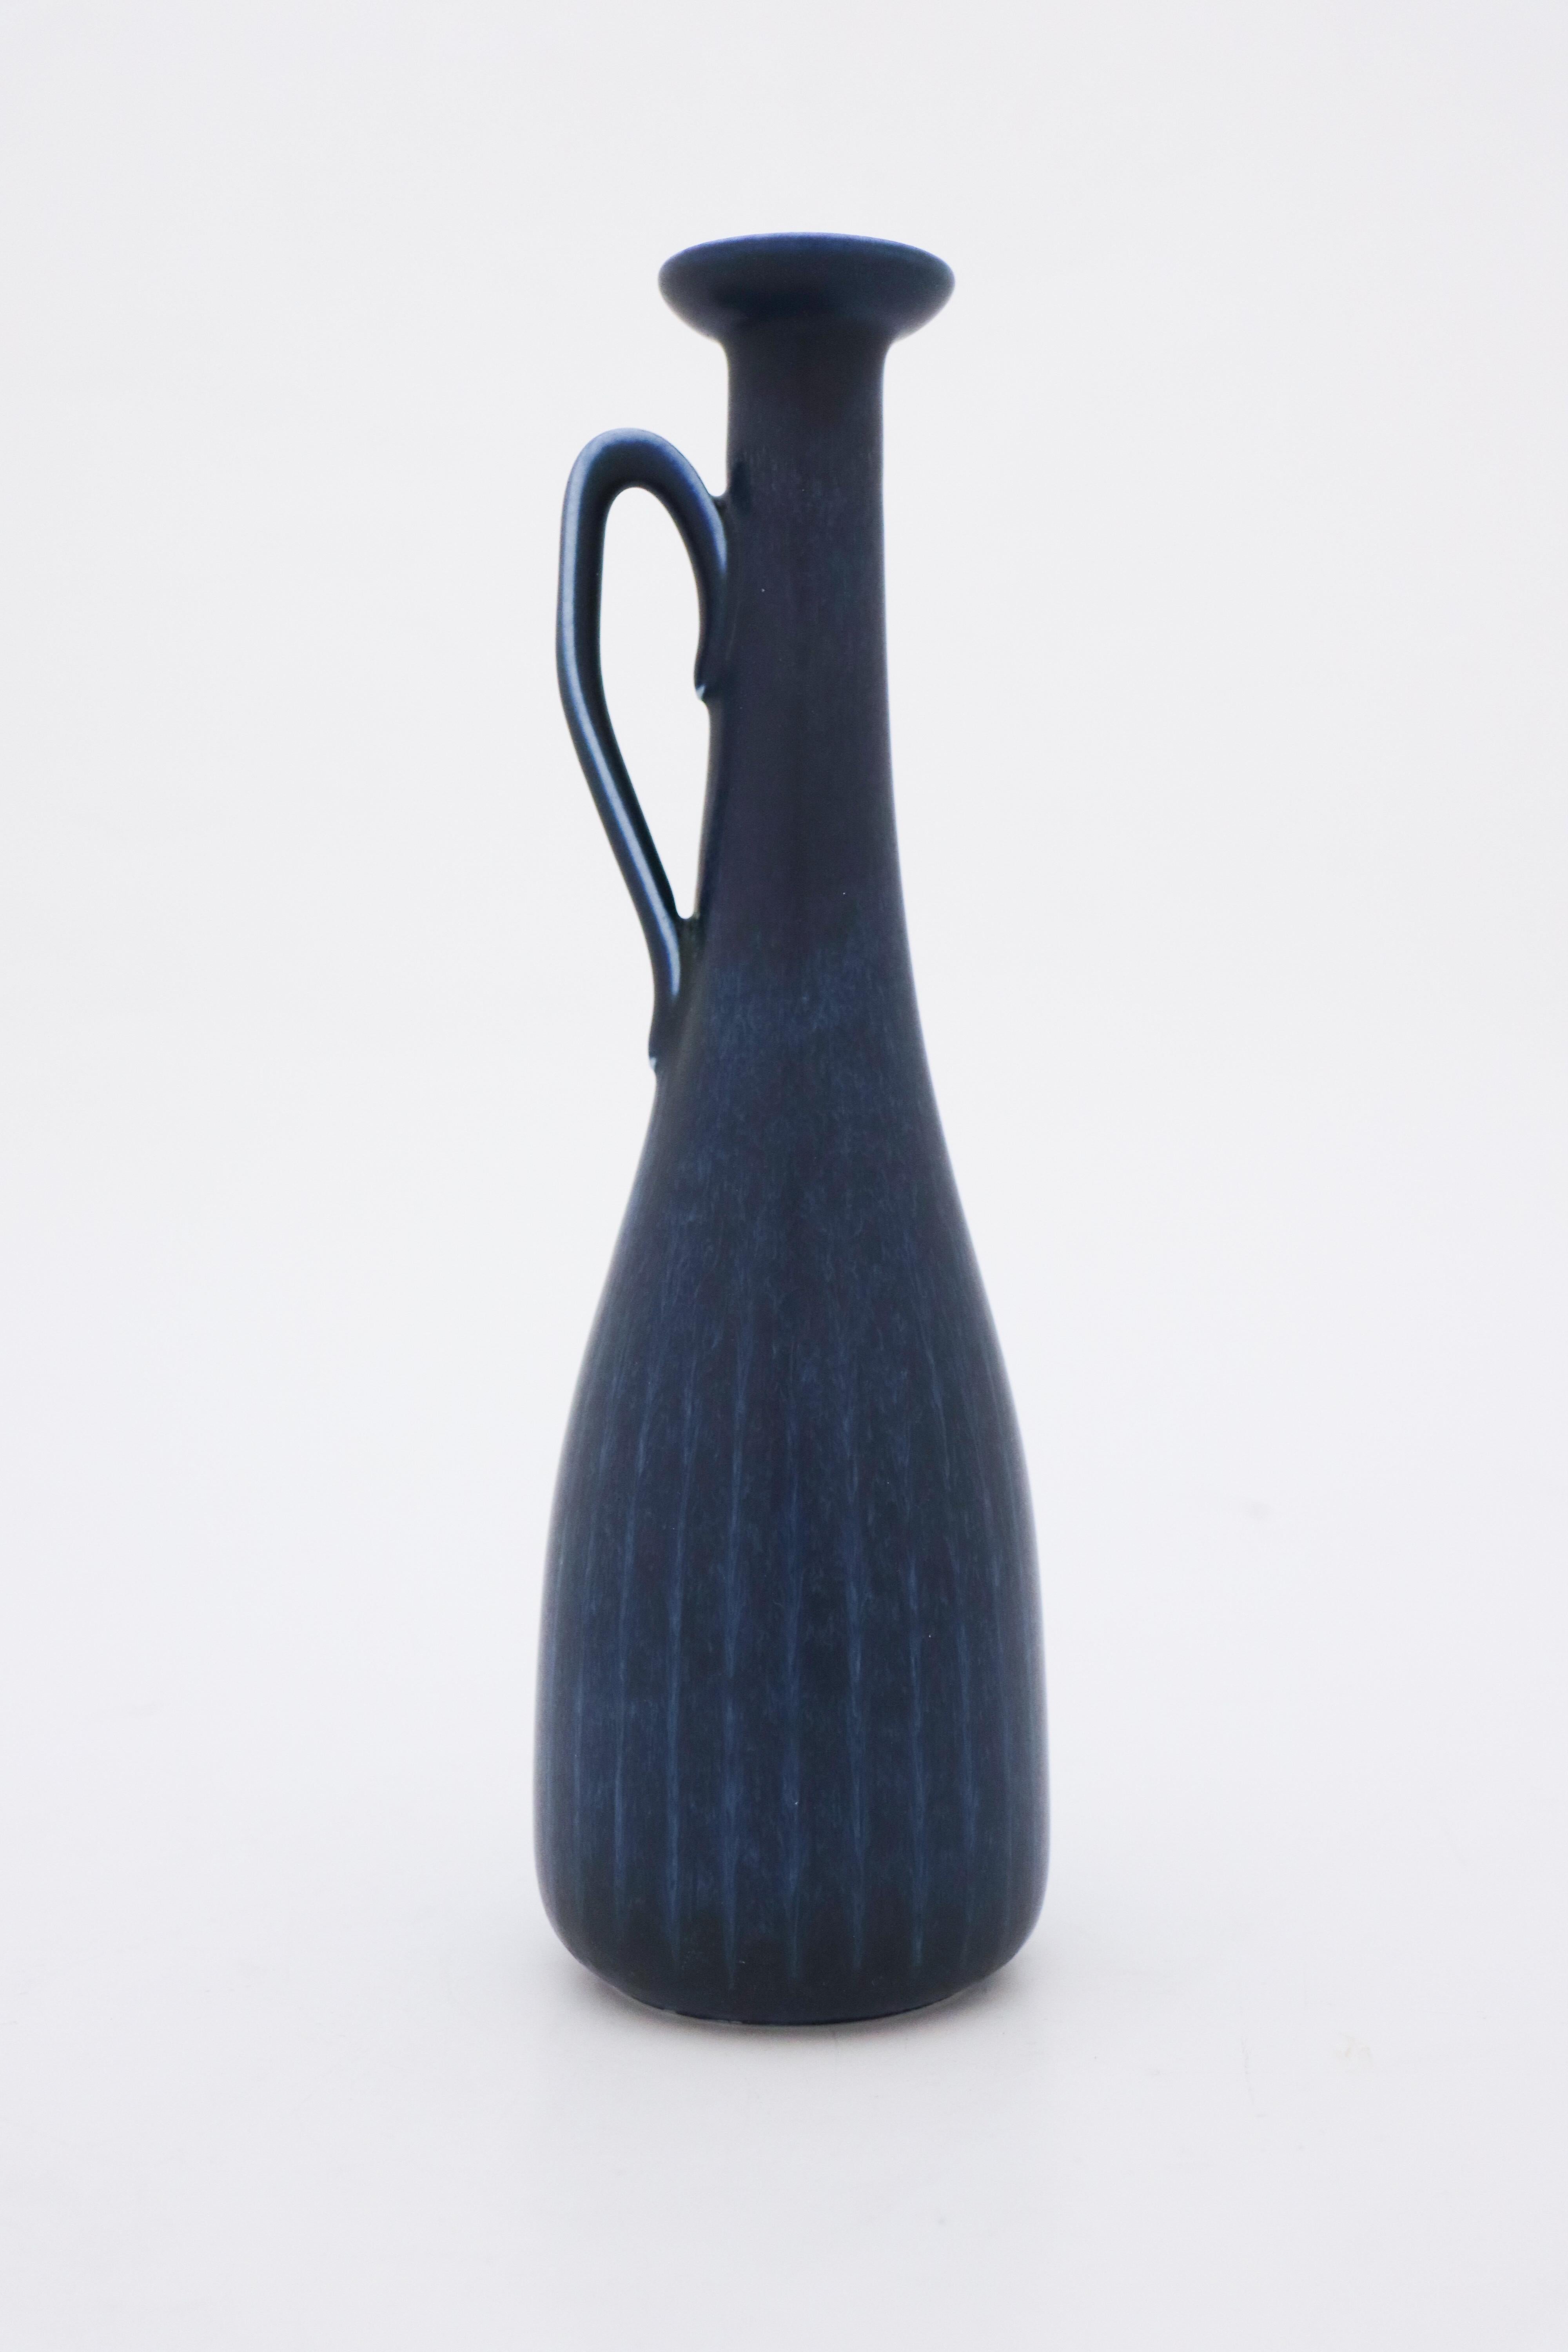 A brown vase designed by Gunnar Nylund at Rörstrand, it´s 24.5 cm (9,8) high. It´s in mint condition and marked as 1:st quality. 

Gunnar Nylund was born in Paris 1904 with parents who worked as sculptors and designer so he really soon started hos